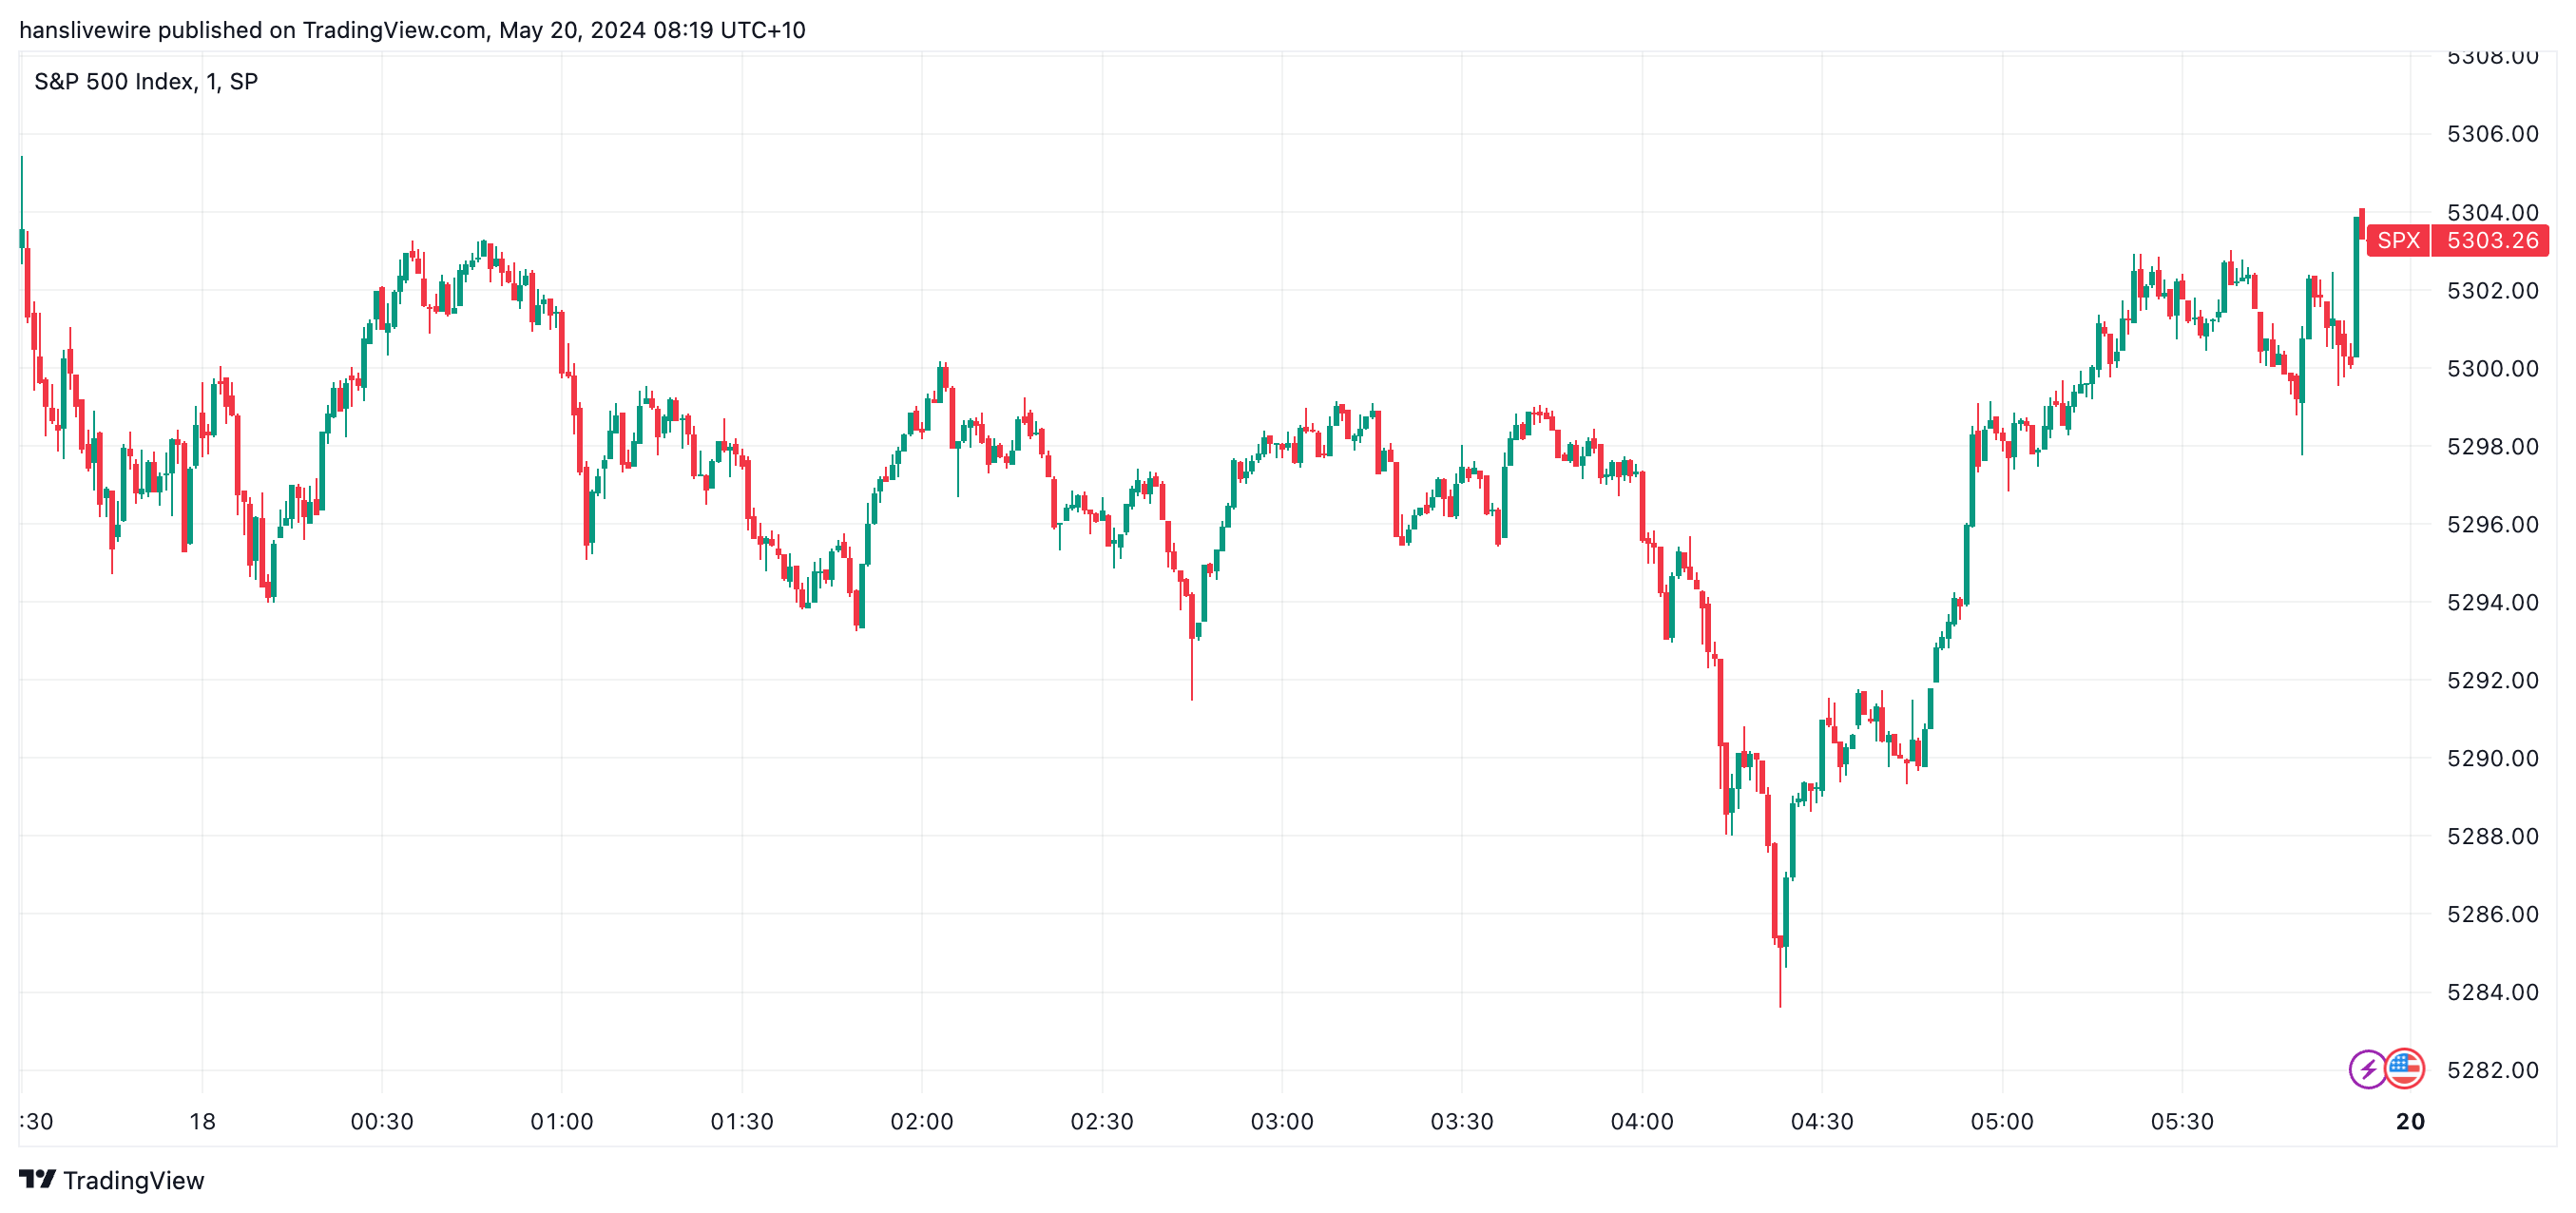 A buying flurry within the last two hours was enough to give the S&P 500 a small rise at the close. (Source: TradingView)